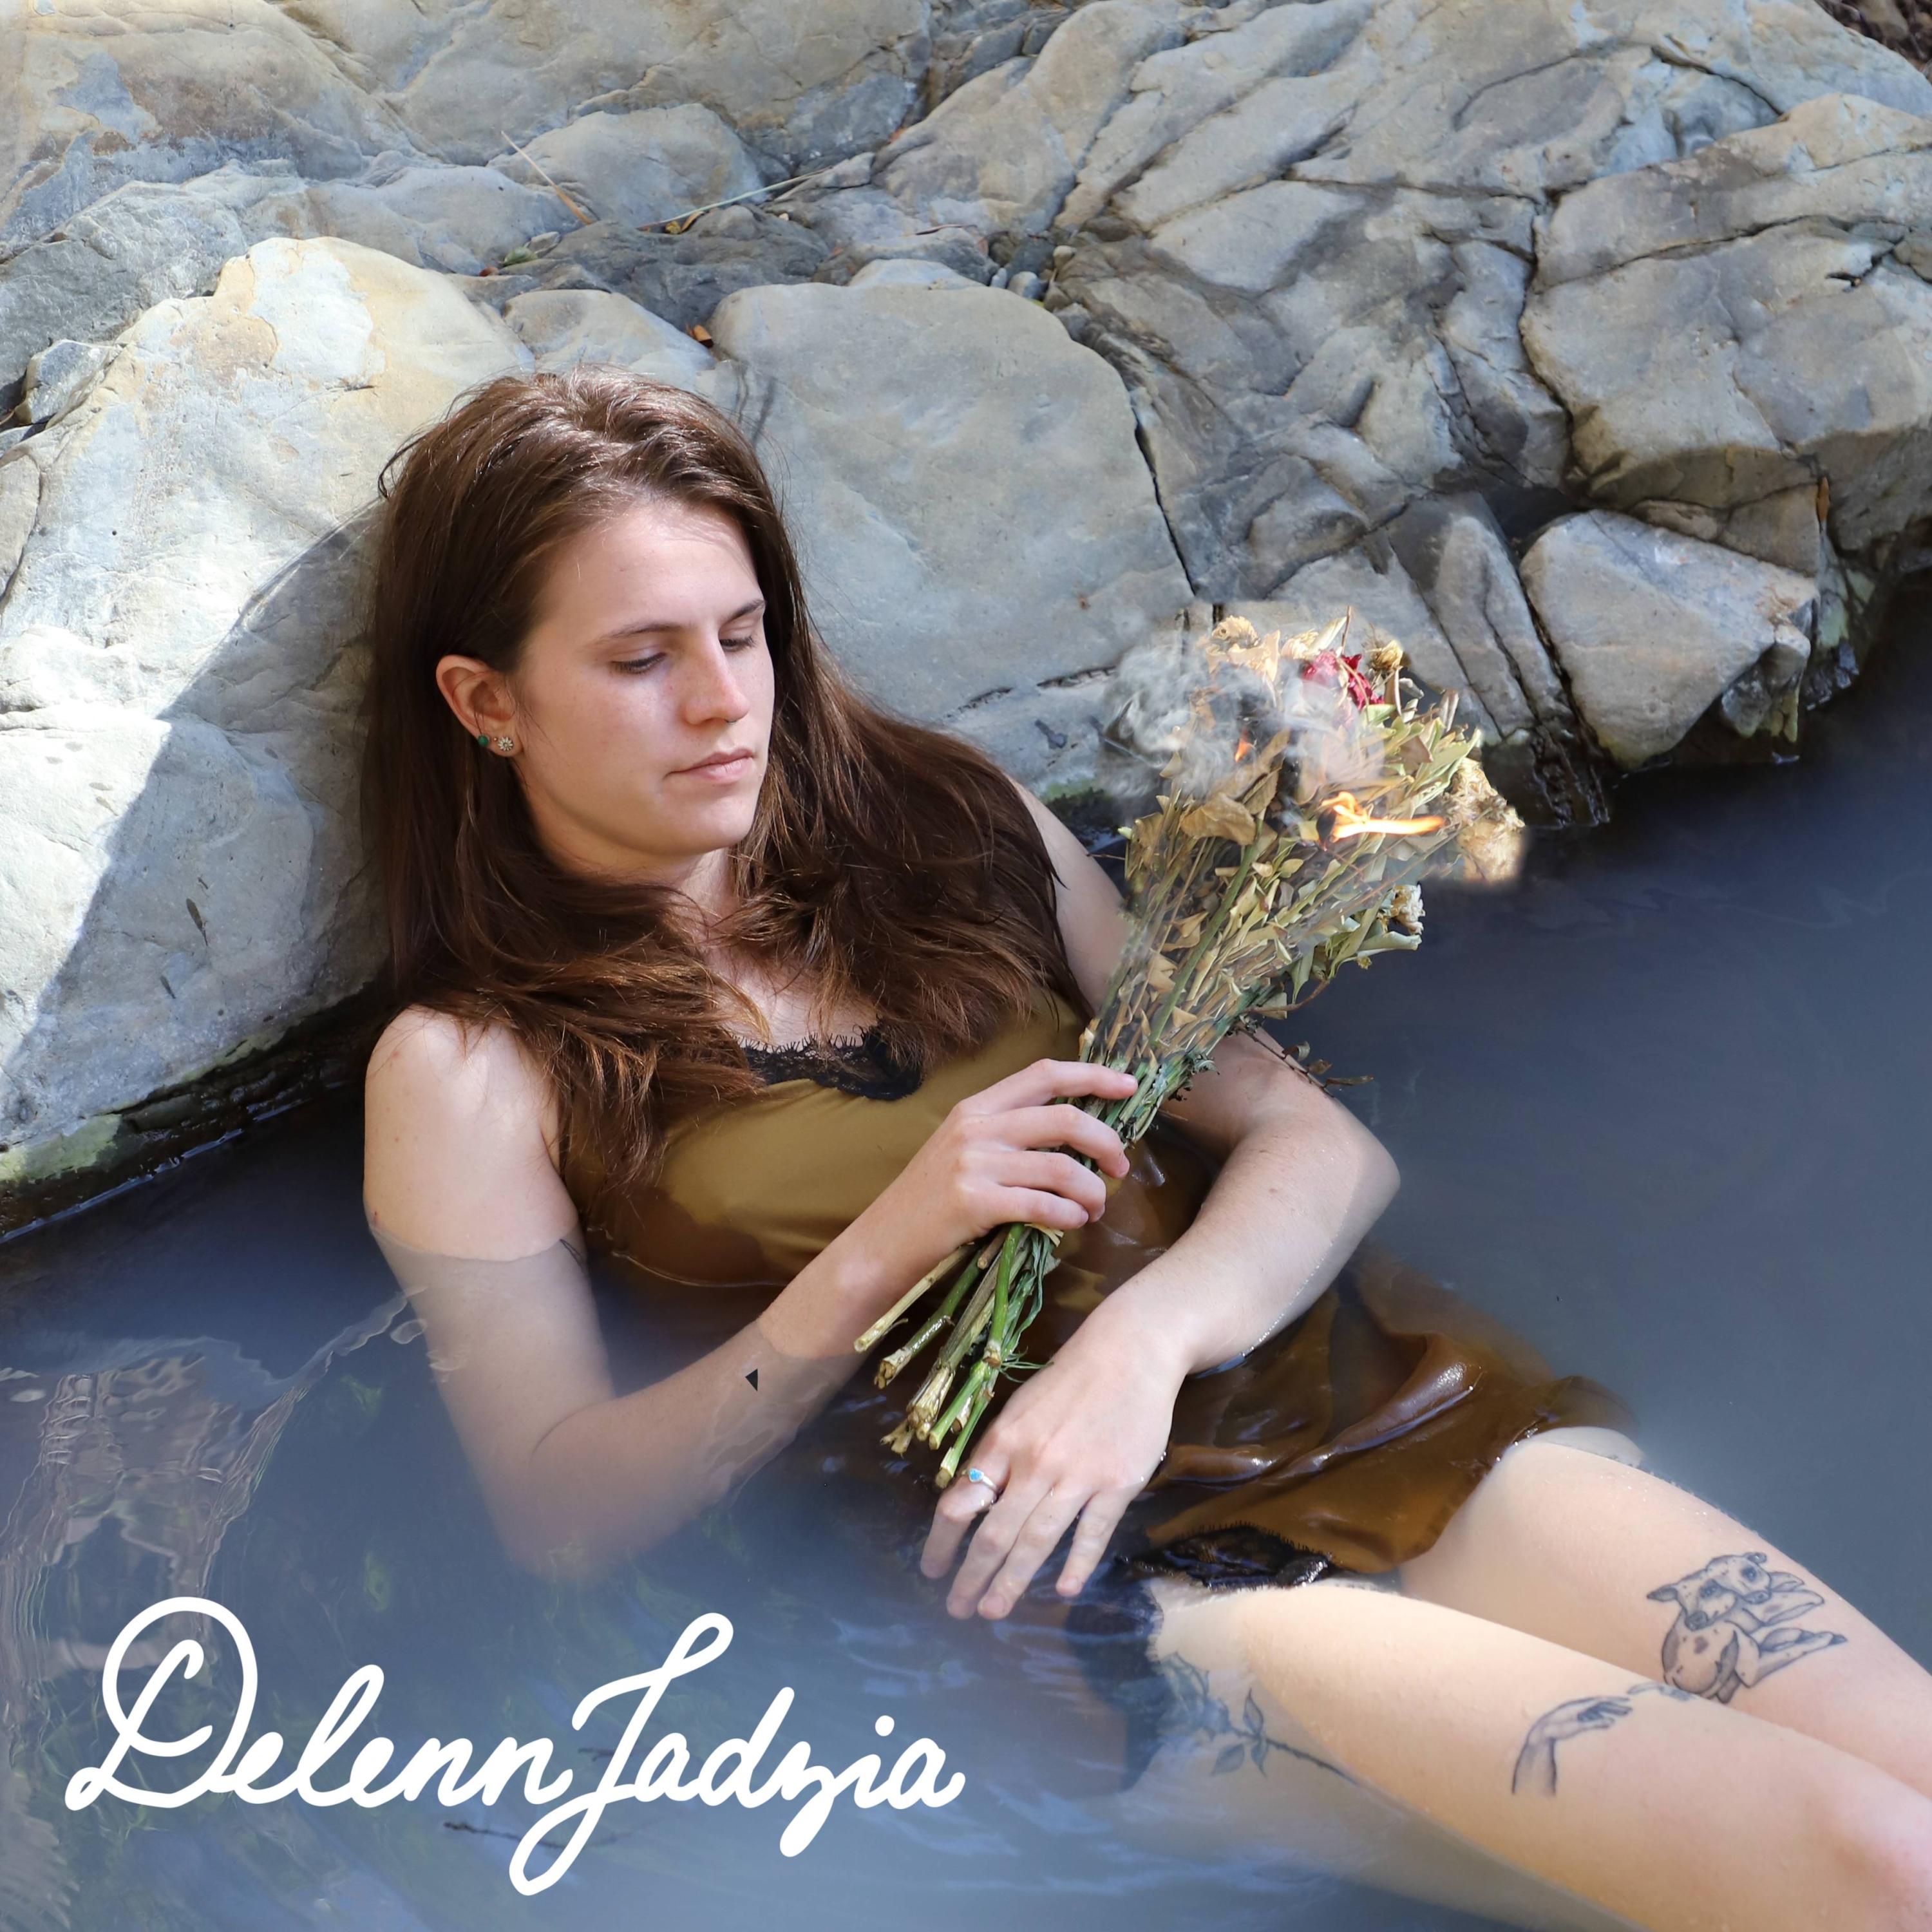 A person in a sild slip is submerged in a spring, holding a flaming bouquet of flowers, reminiscent of Ophelia.